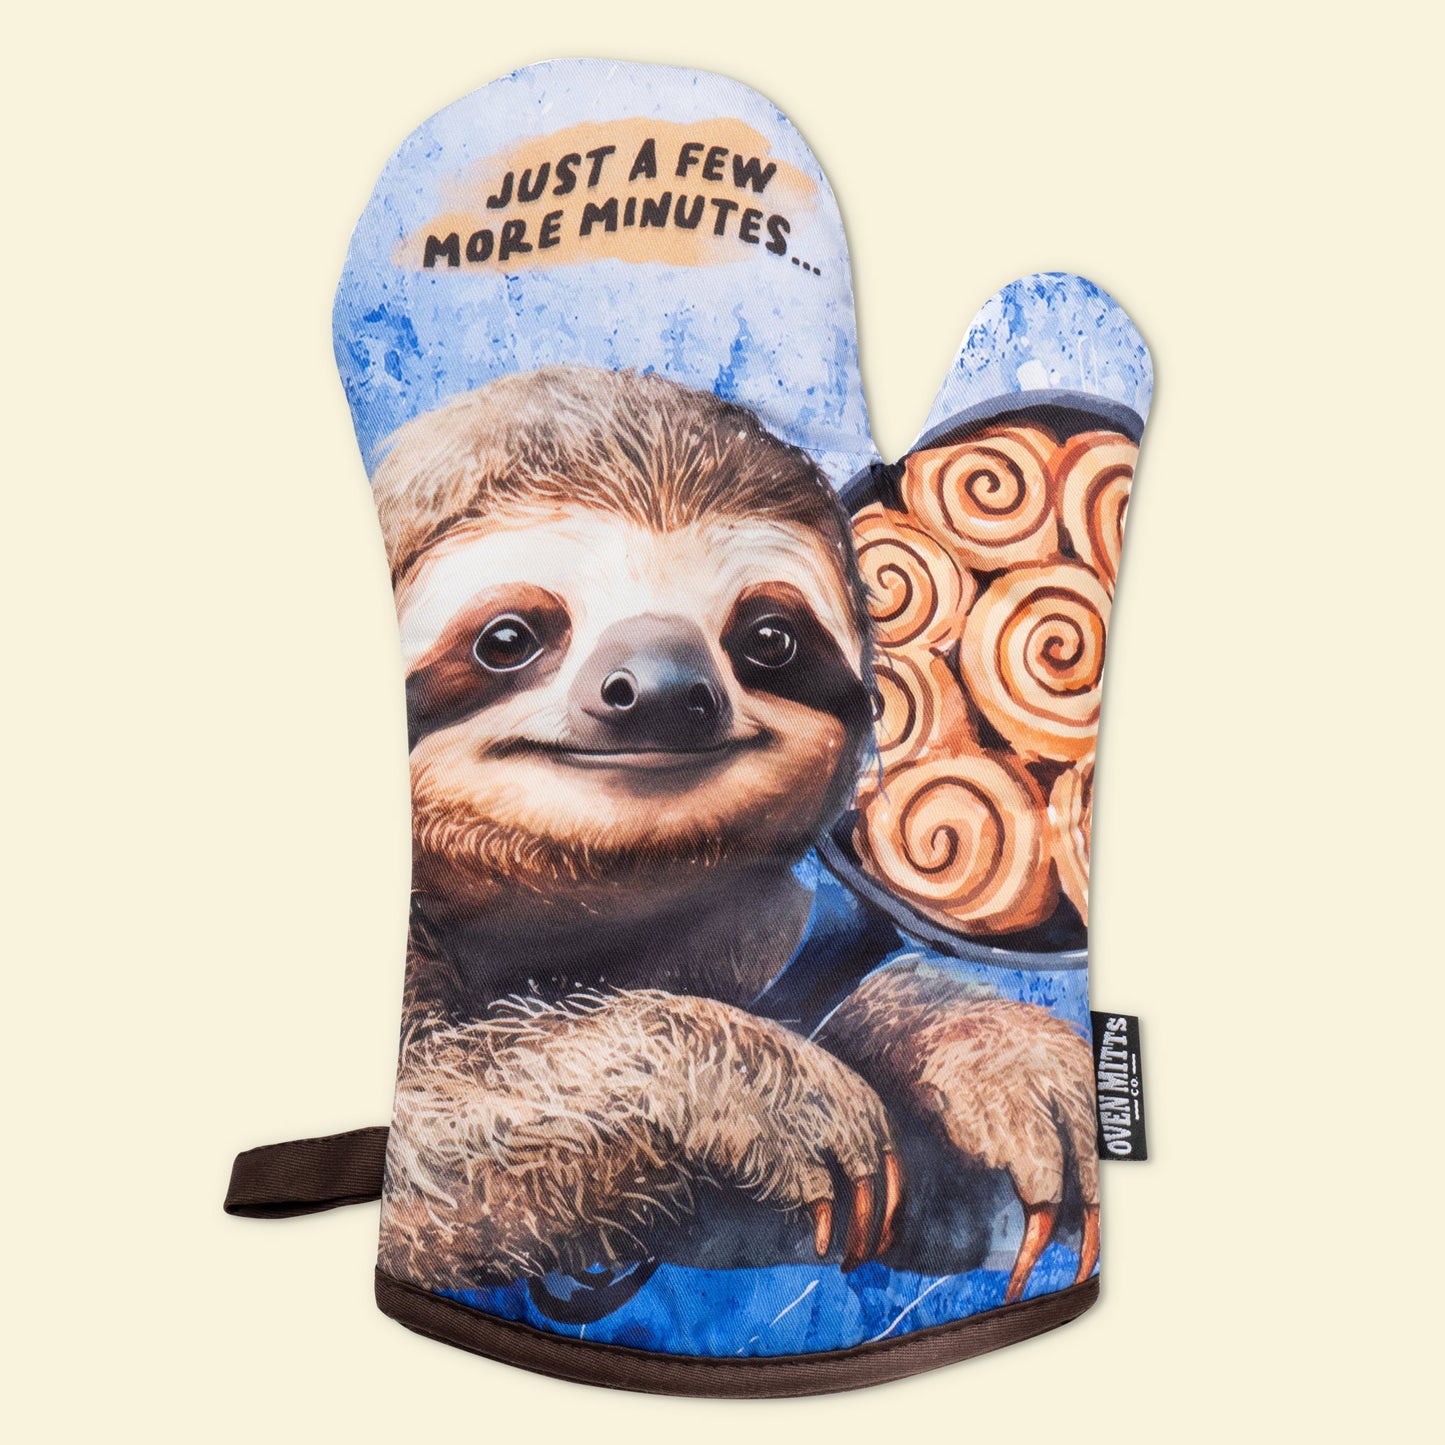 Sloth Just A Few More Minutes Oven Mitts gloves funny